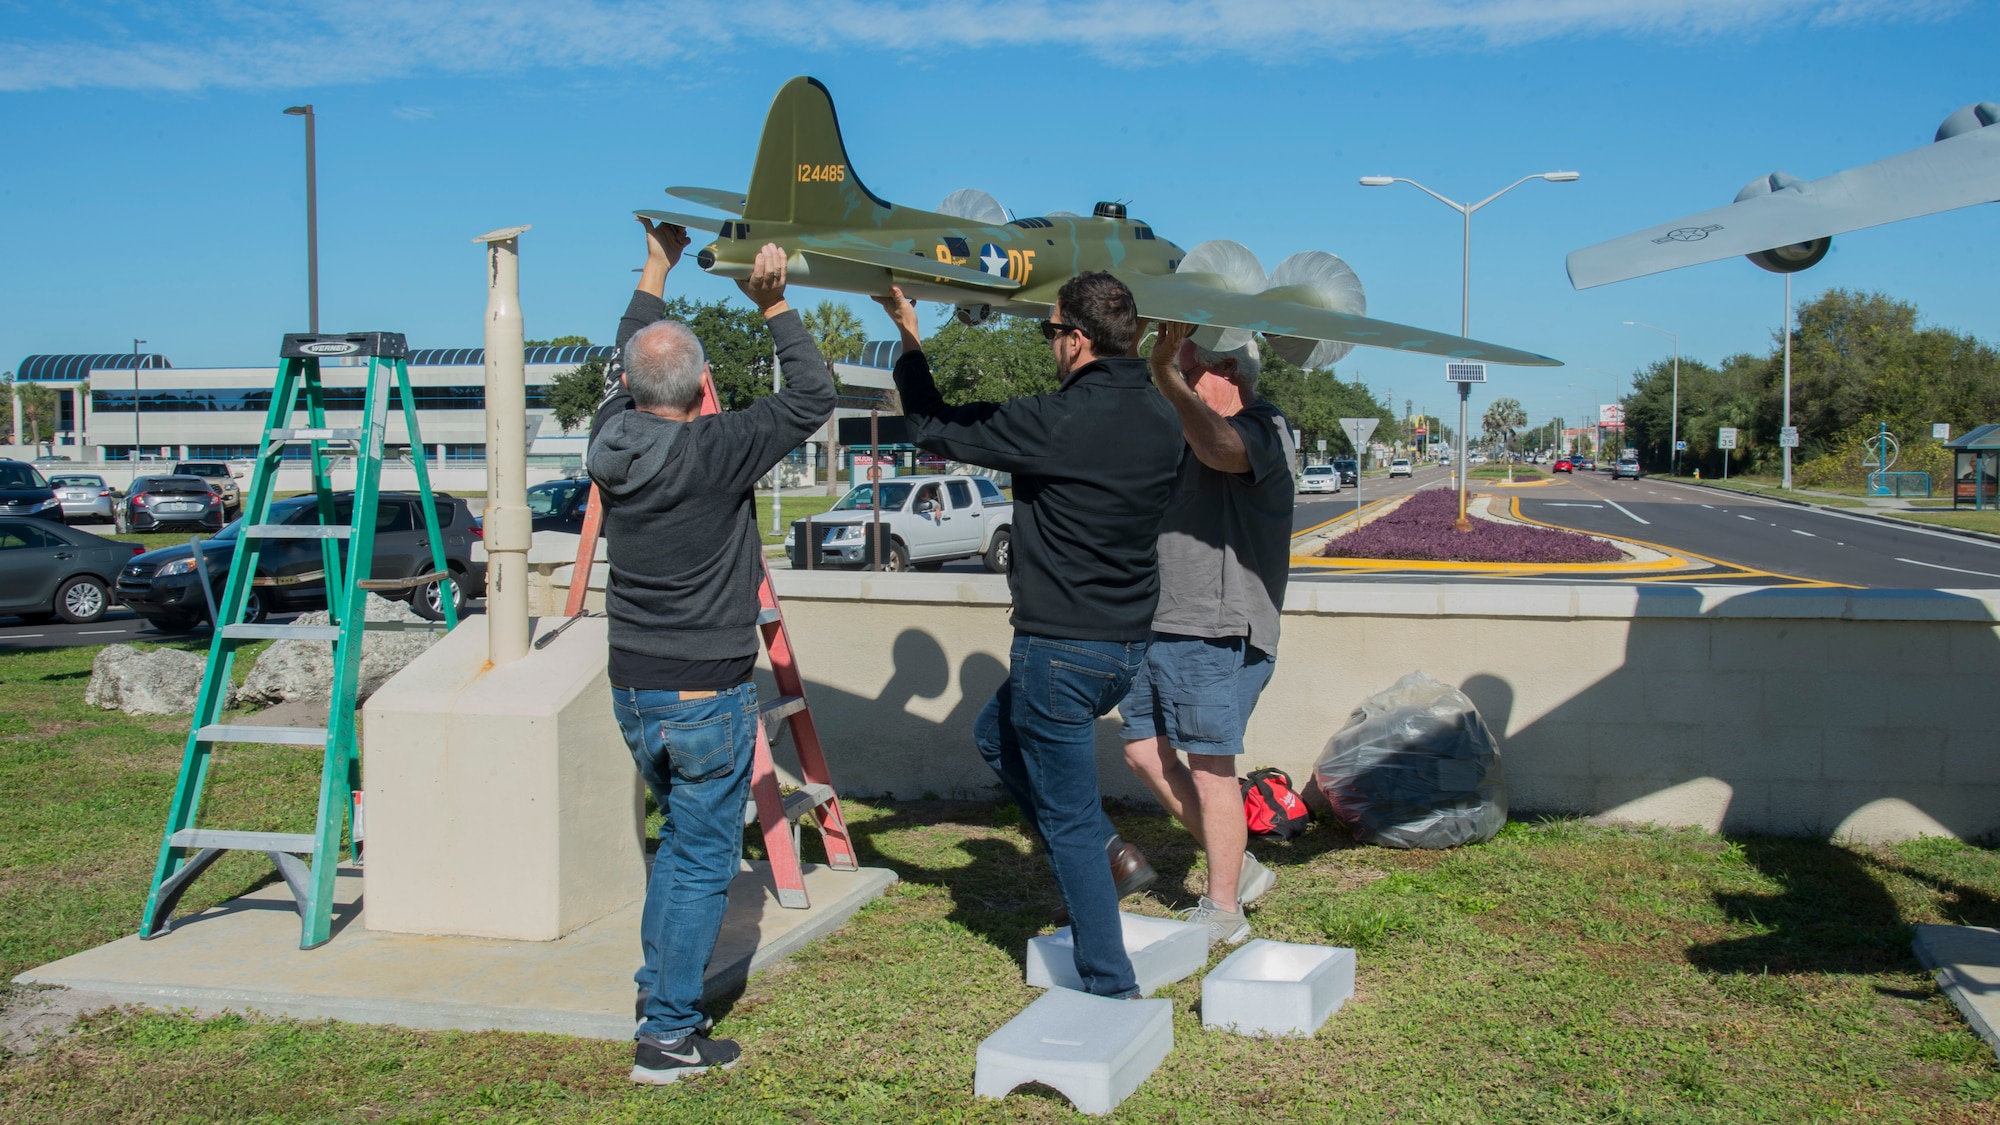 Gino Galvez (left), an Atlantic-Models scale model manufacturer, Stephen Ove (center), the 6th Air Refueling Wing historian and Roger Jarman (right), the Atlantic-Models vice president, lift a scale model of the Memphis Belle, a B-17 Flying Fortress onto a display-stand Jan. 8, 2020, at MacDill Air Force Base, Fla.  The Memphis Belle was stationed at MacDill AFB in 1942, went on to complete 25 combat missions against Nazi Germany. (U.S. Air Force photo by Airman 1st Class Shannon Bowman)